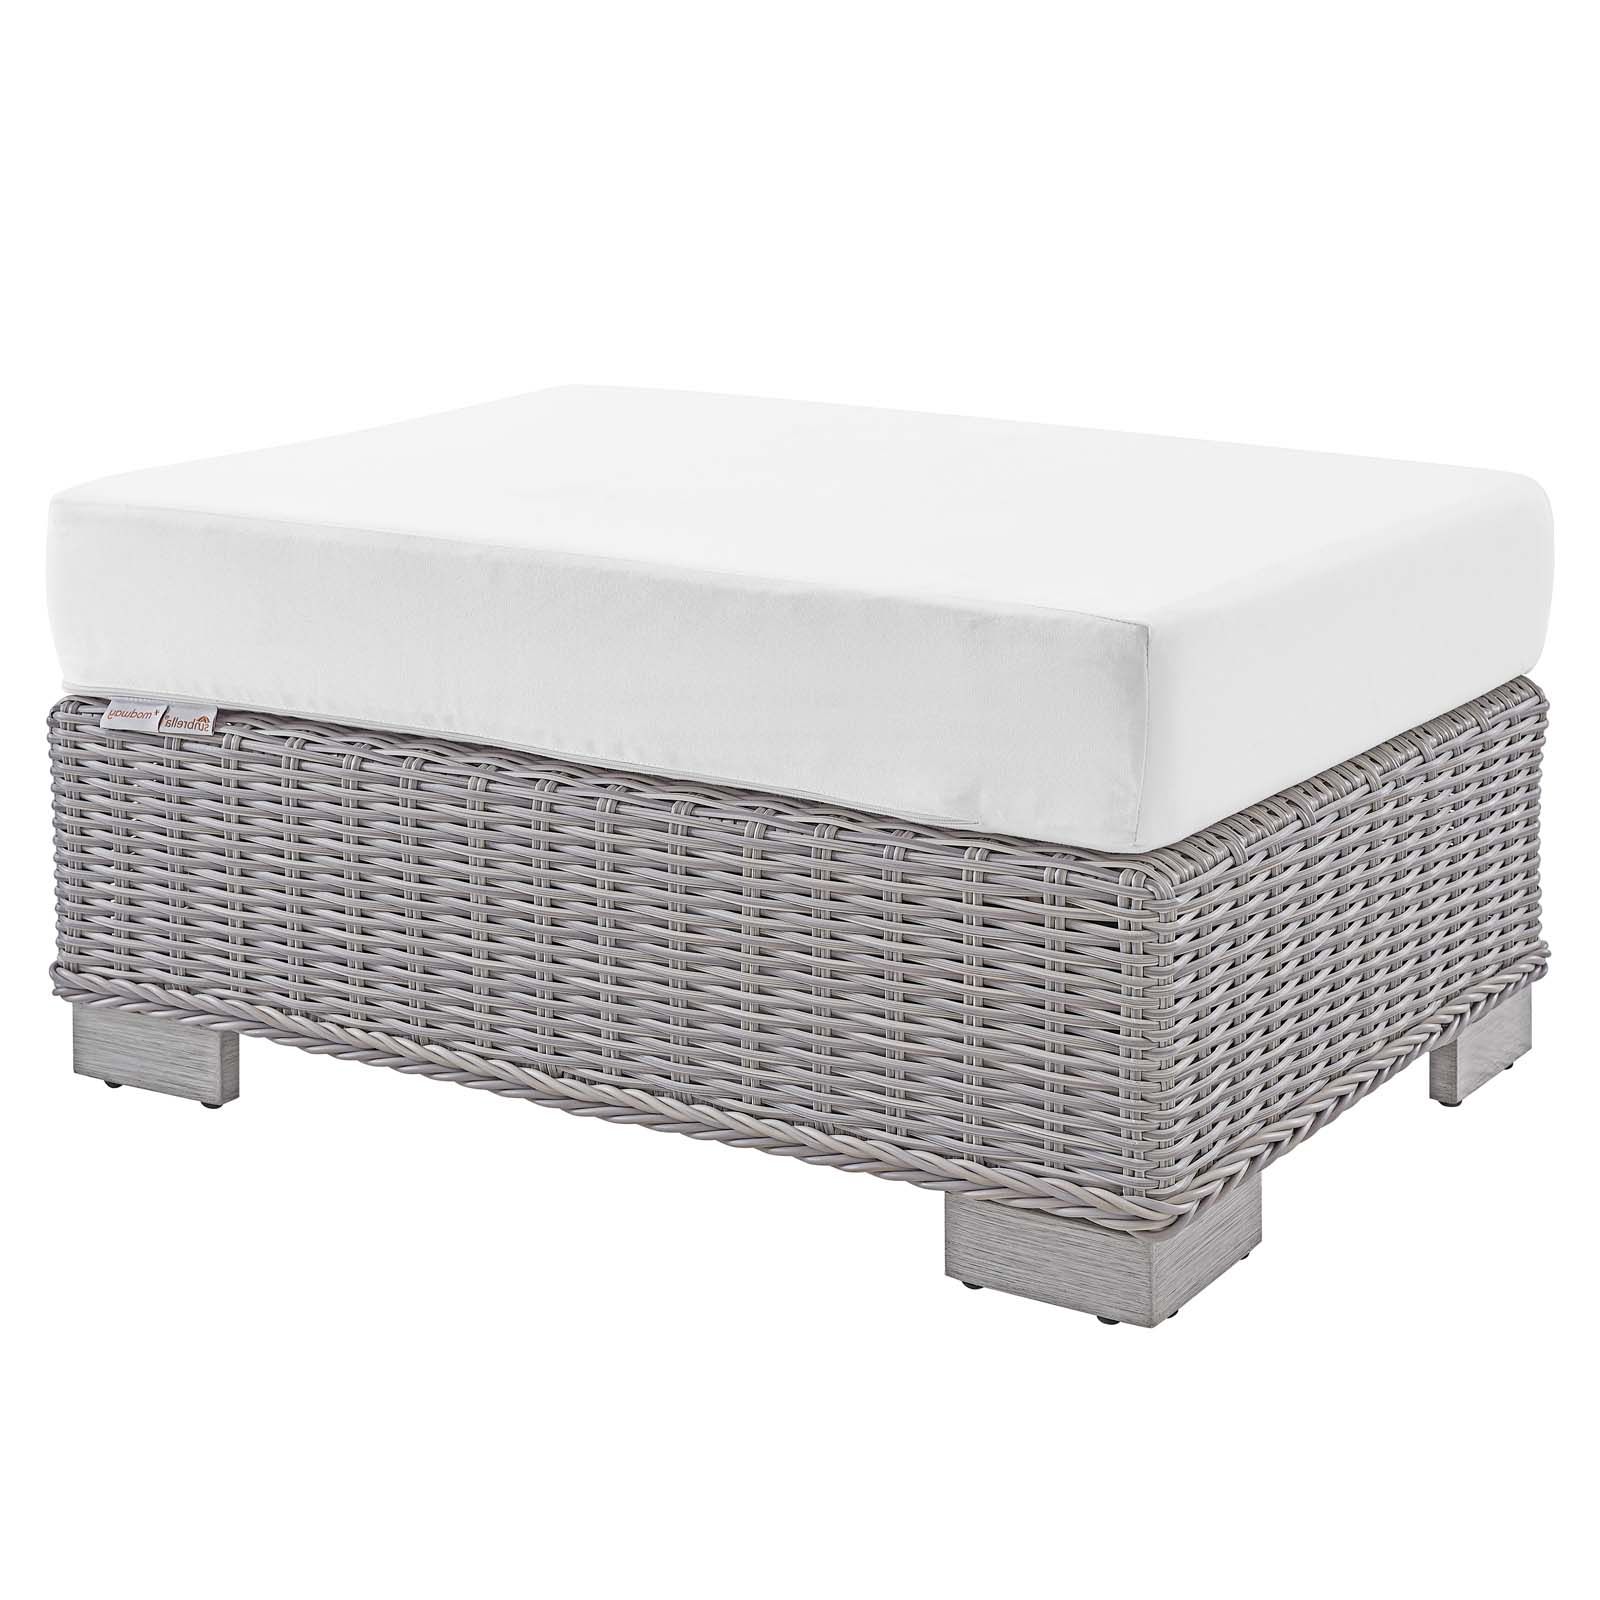 Conway Outdoor Patio Wicker Rattan Ottoman In Light Gray White With Regard To Preferred White And Light Gray Cylinder Pouf Ottomans (View 10 of 10)